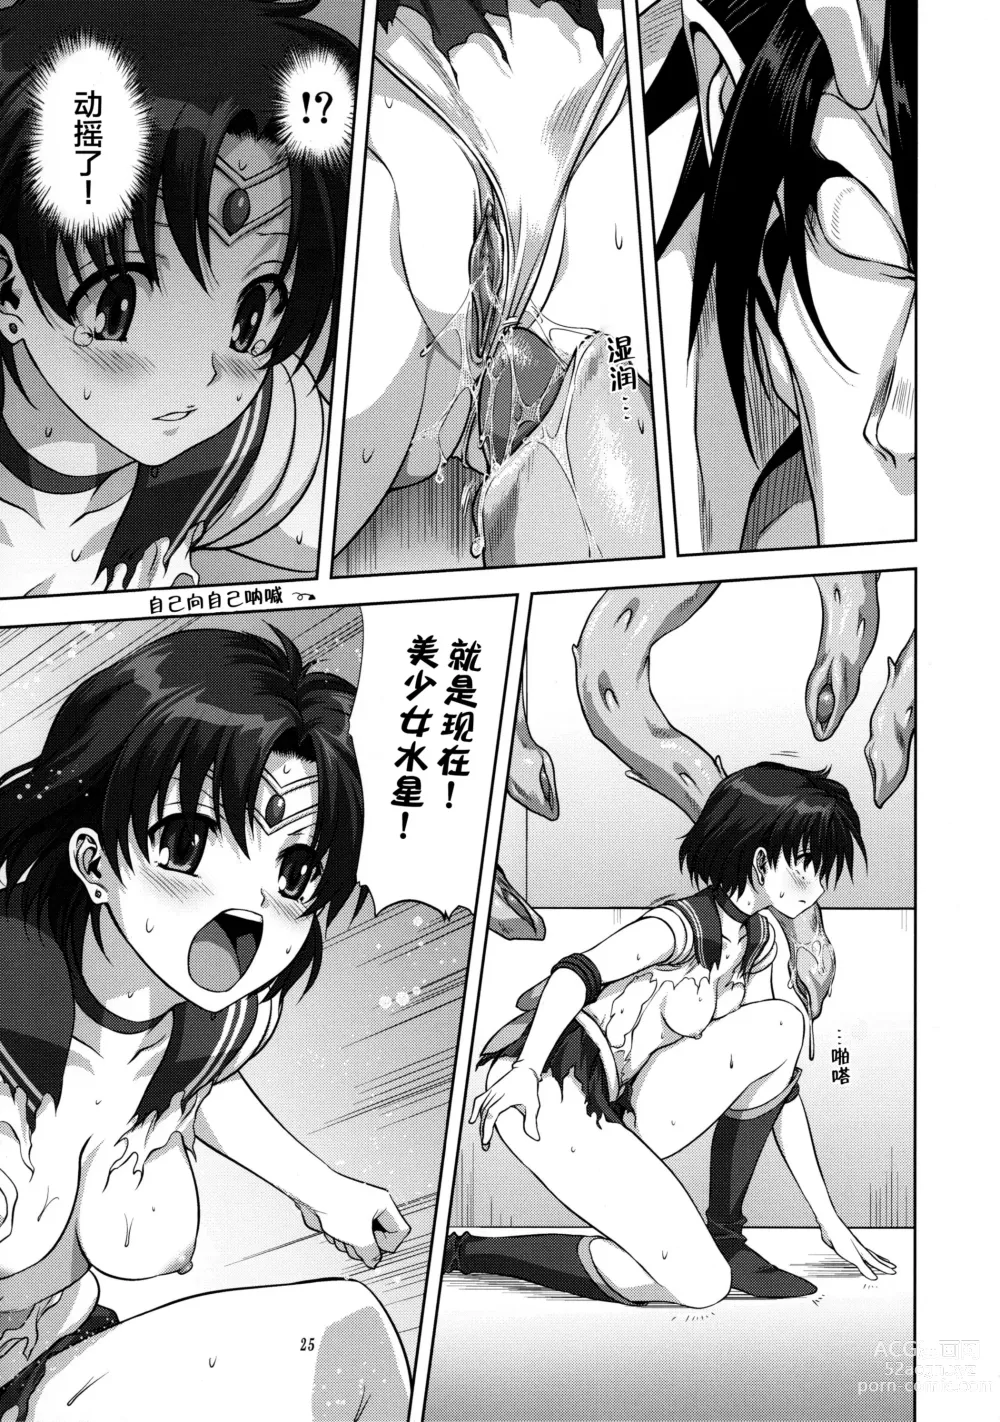 Page 25 of doujinshi Ami-chan to Issho (decensored)